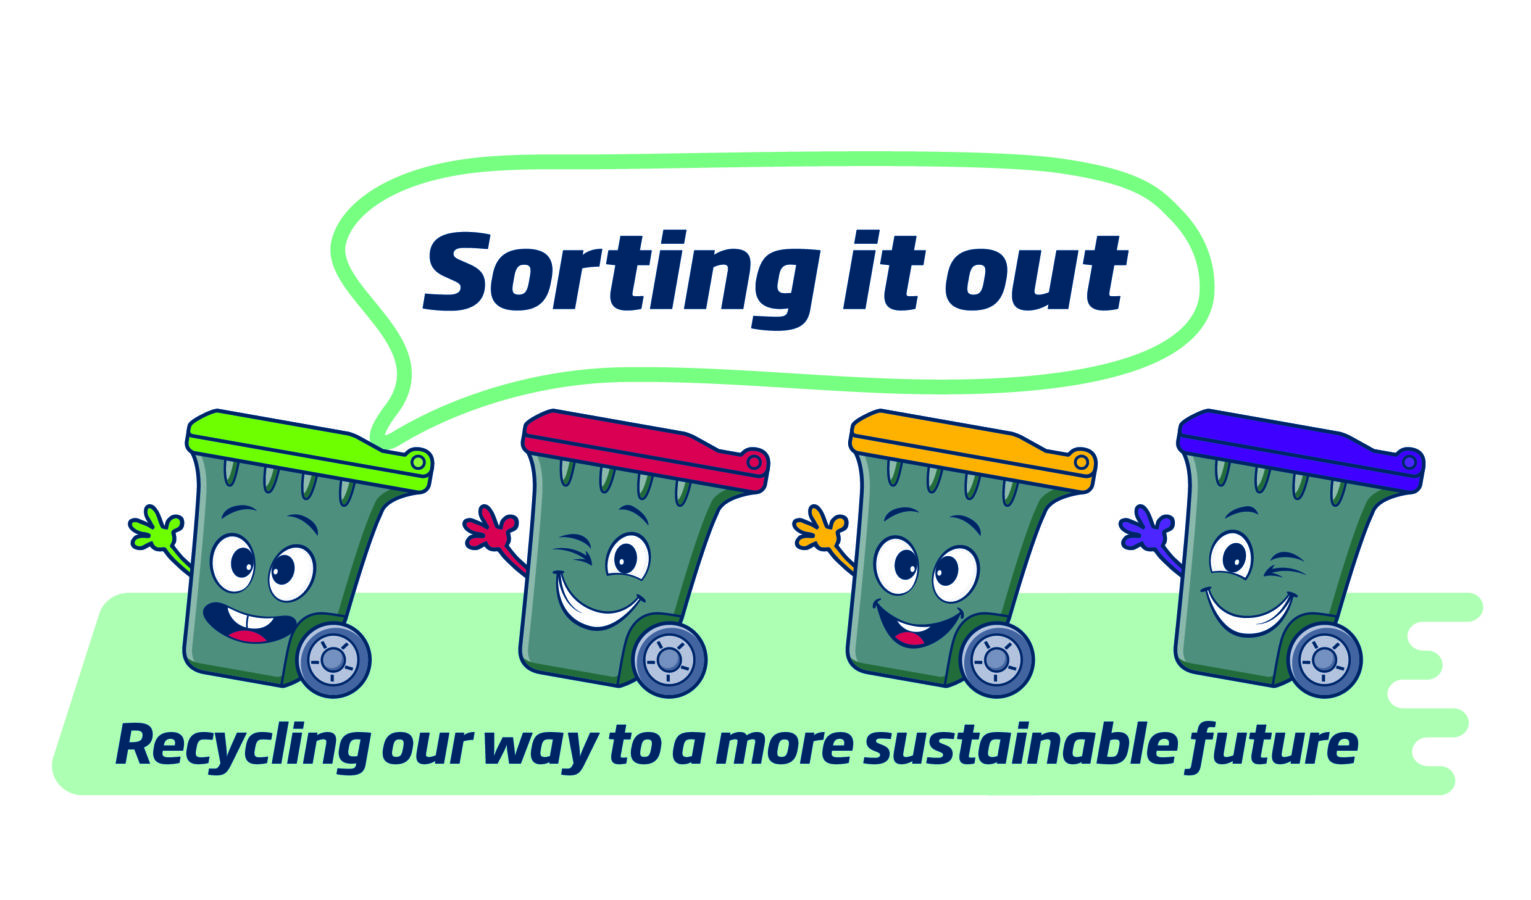 Sorting it out - Recycling our way to a more sustainable future